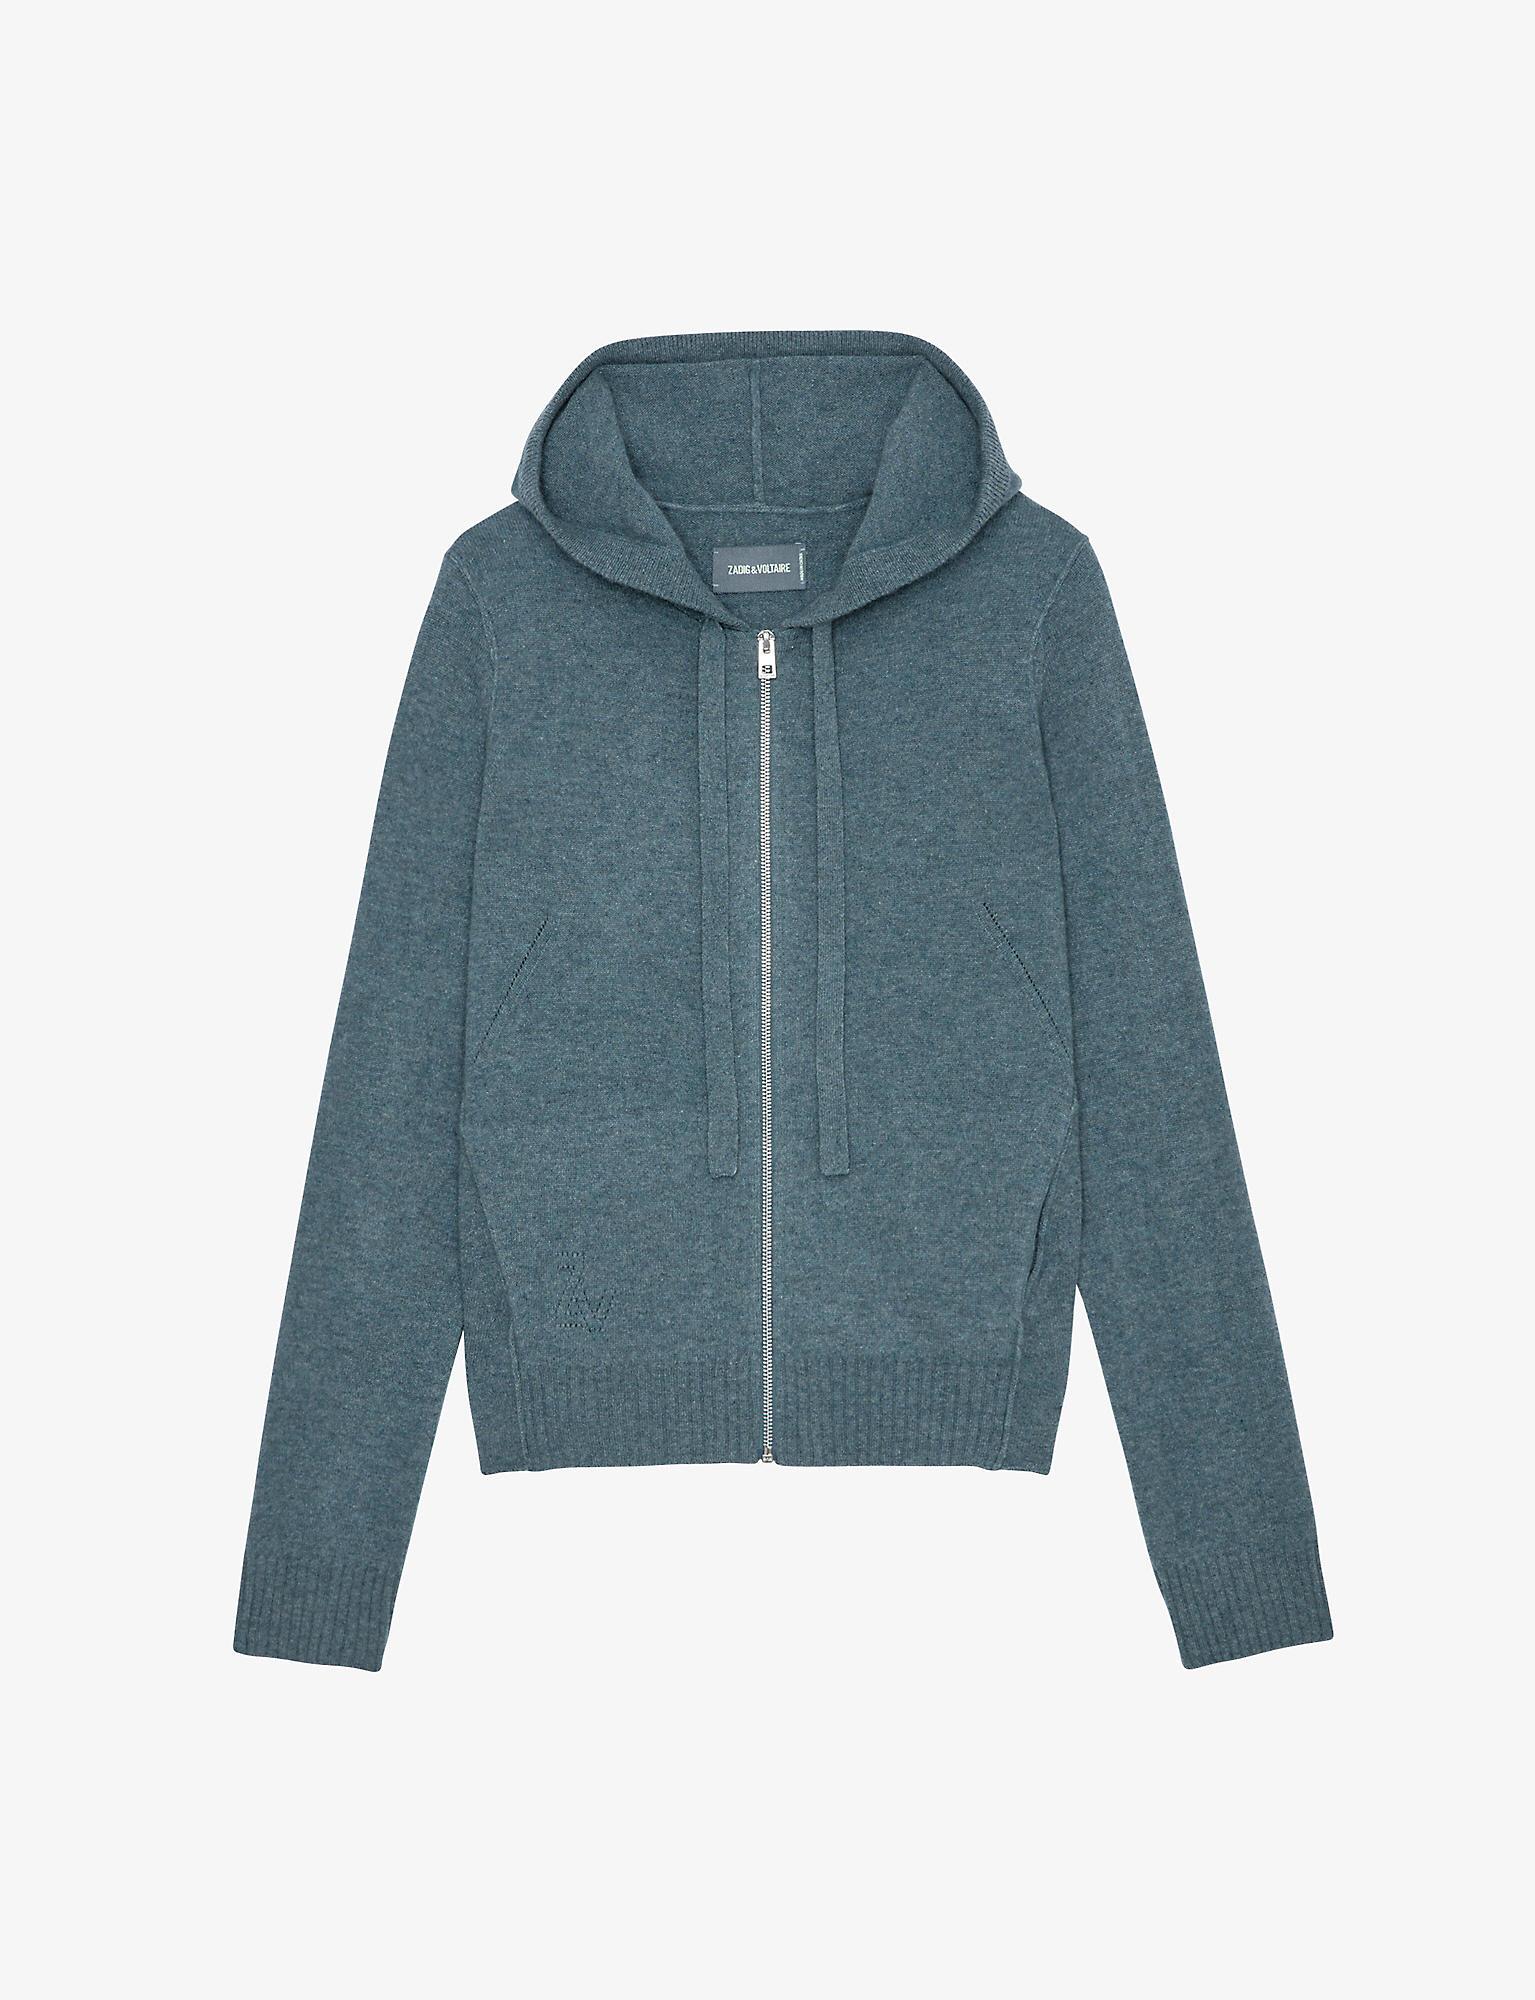 Zadig & Voltaire Cassy Star-patch Zipped Cashmere-knit Hoody in Blue | Lyst